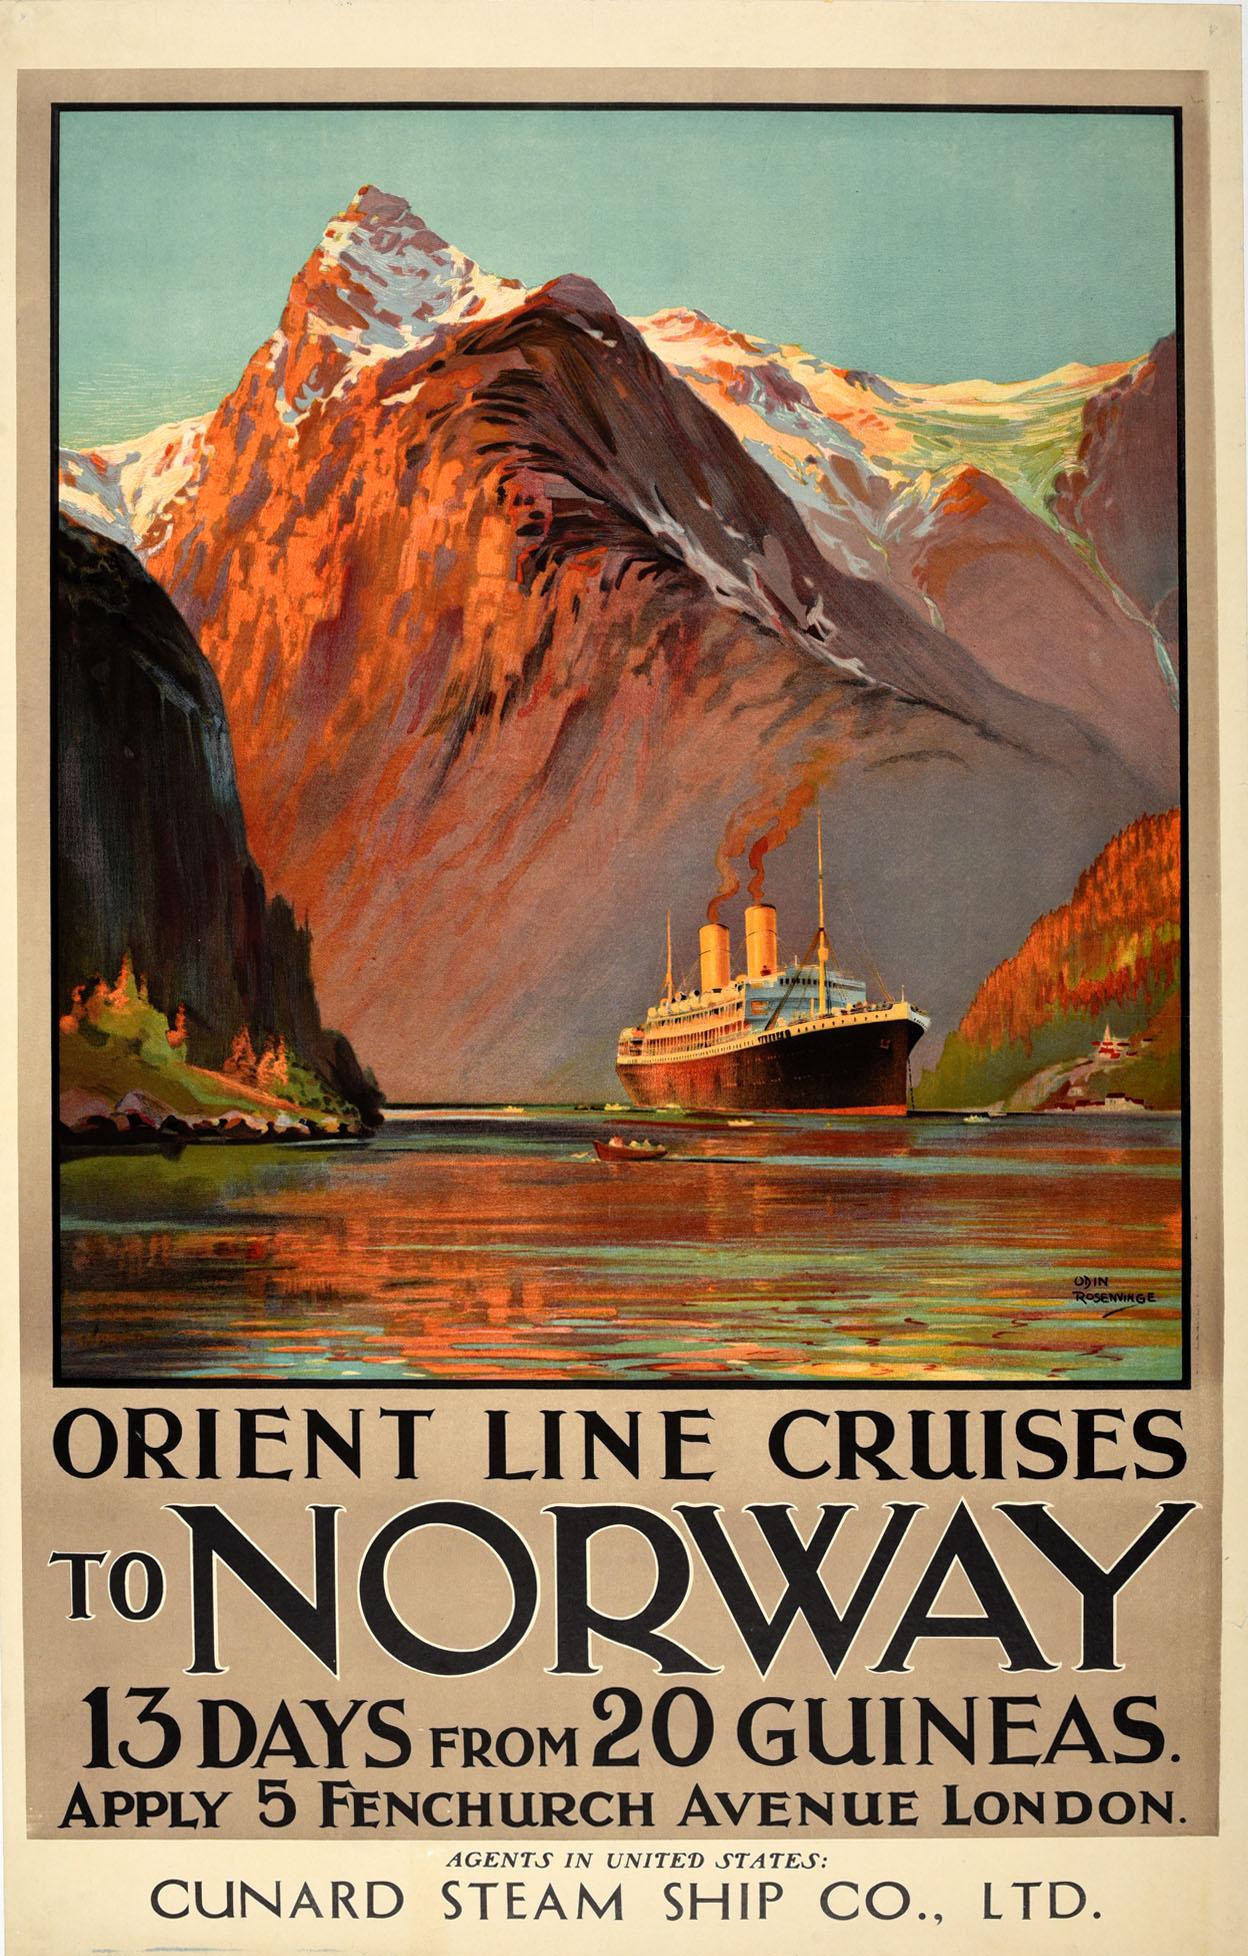 1902 A4 Glossy Vintage Cruise Line Poster Art Print Clyde Shipping Co Ltd